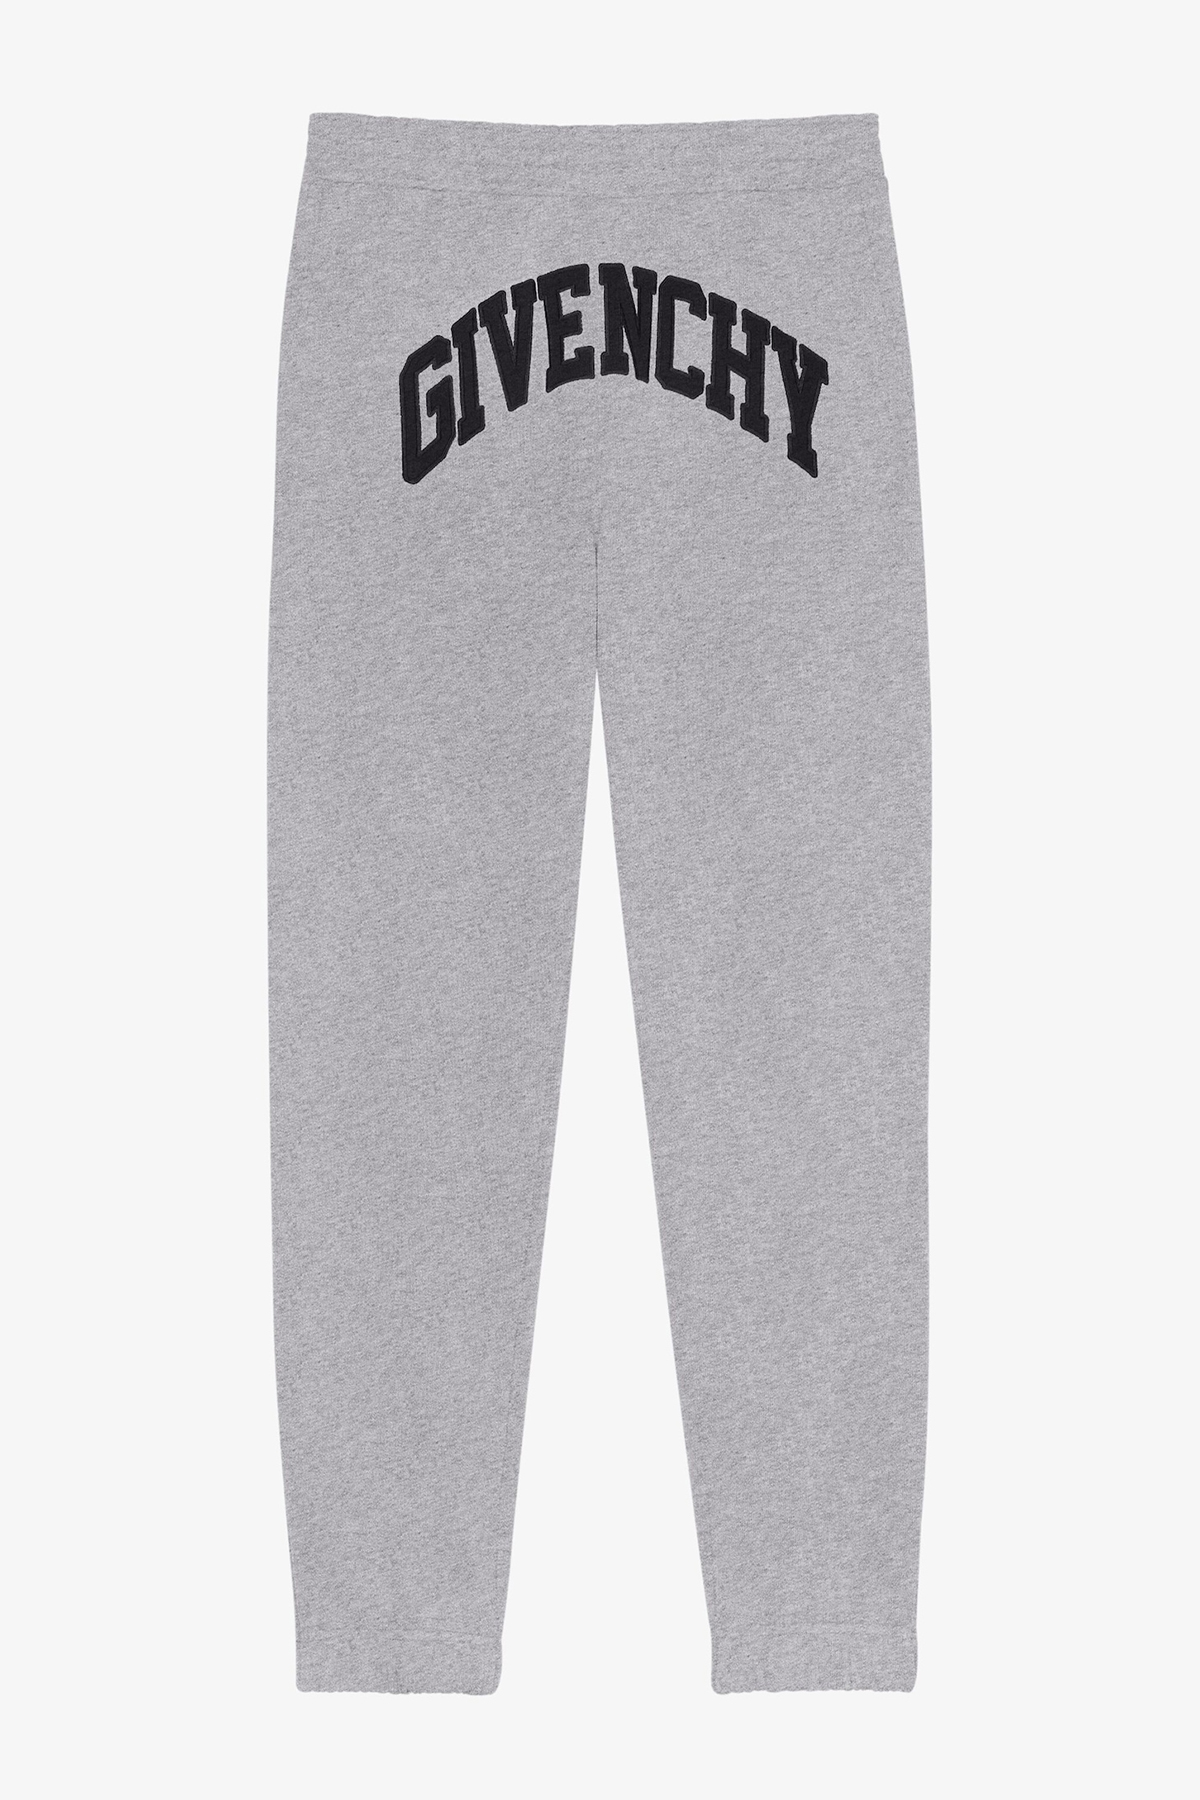 Givenchy Sweatpants 6T — Retykle